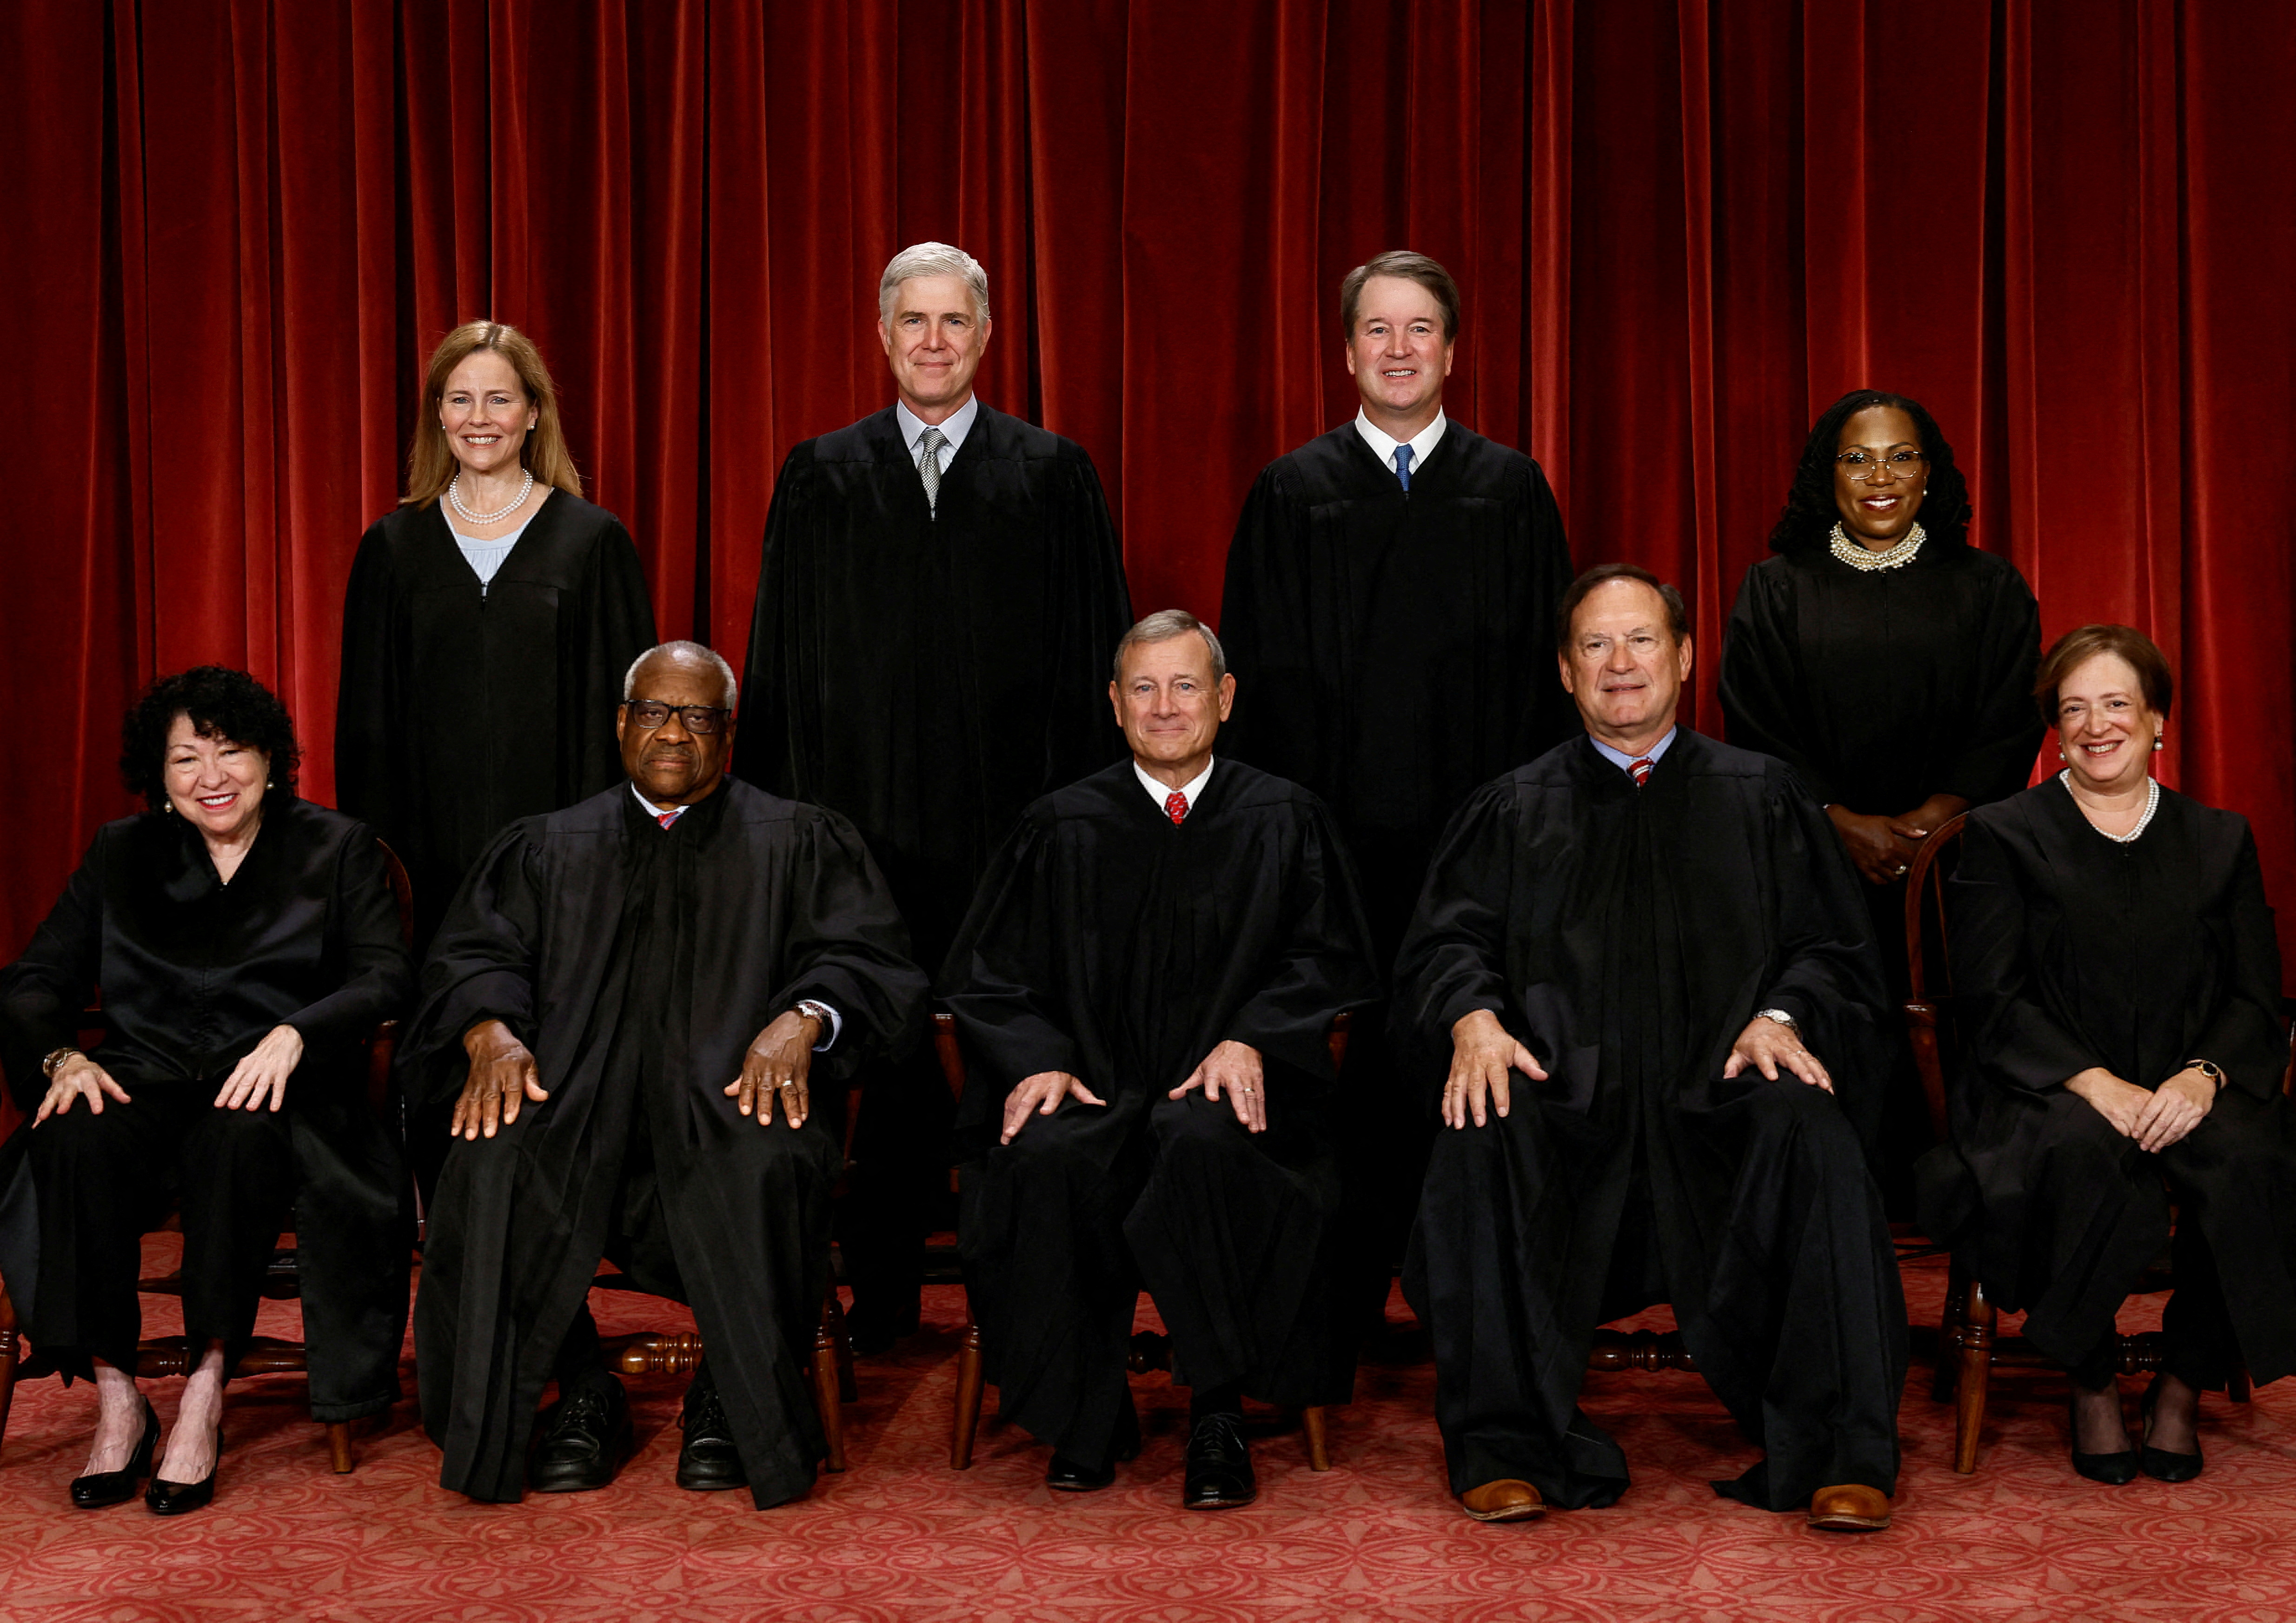 U.S. Supreme Court justices pose for their group portrait at the Supreme Court in Washington